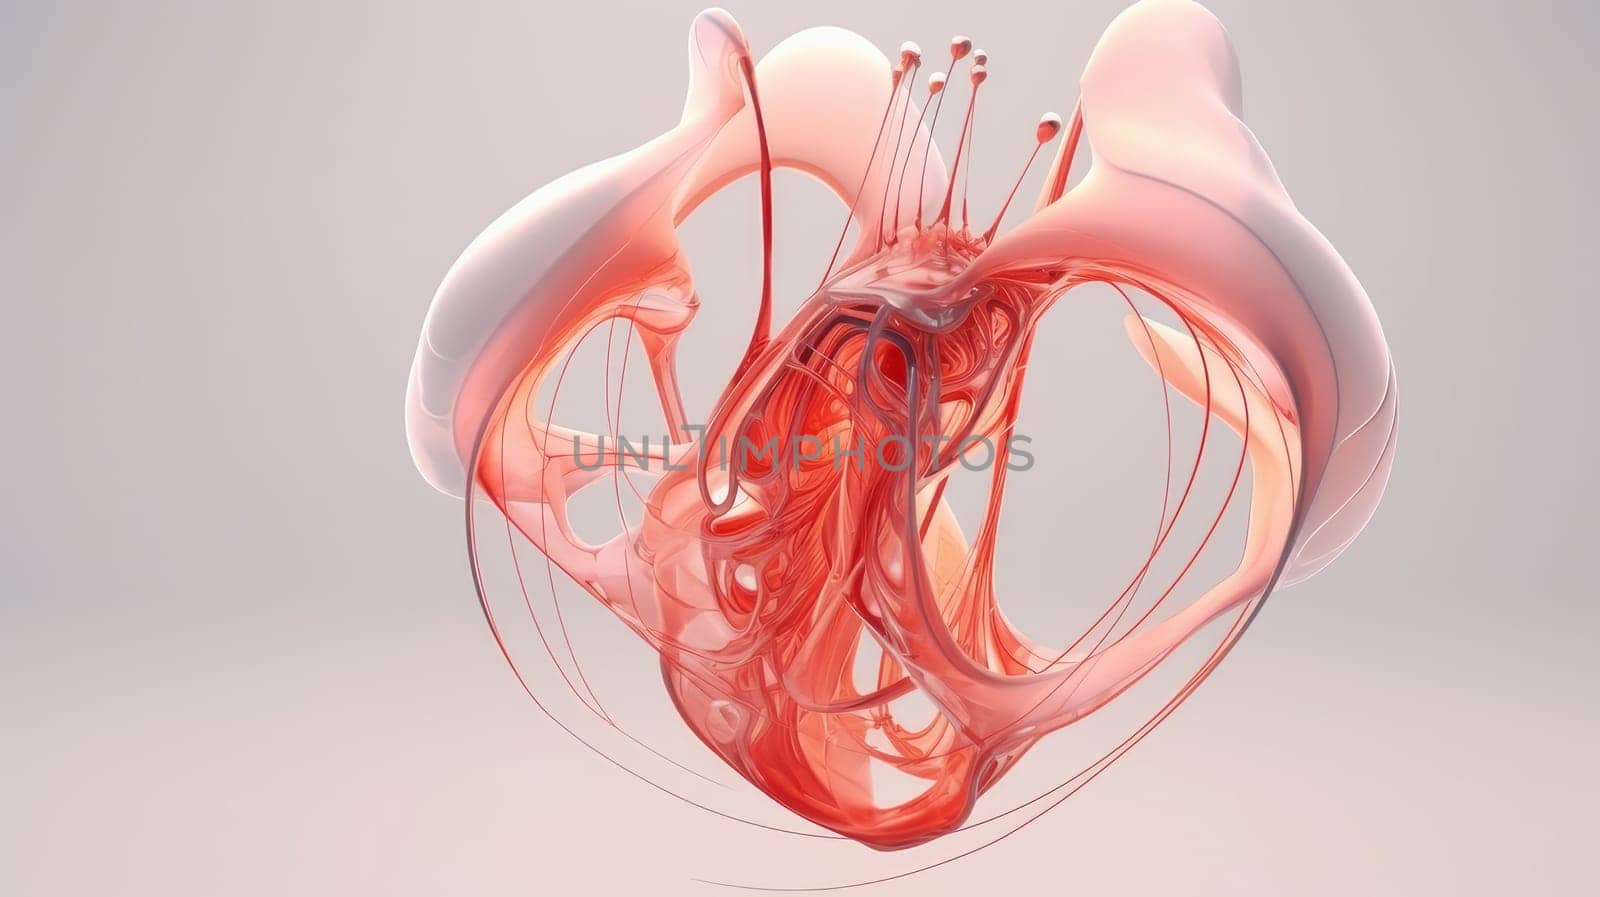 Anatomical model of the human body and organs. Part of a human body model with organ system. 3D modeling in the field of internal organ transplantation. Technologies in medicine and scientific research of the body, the study of human internal organs